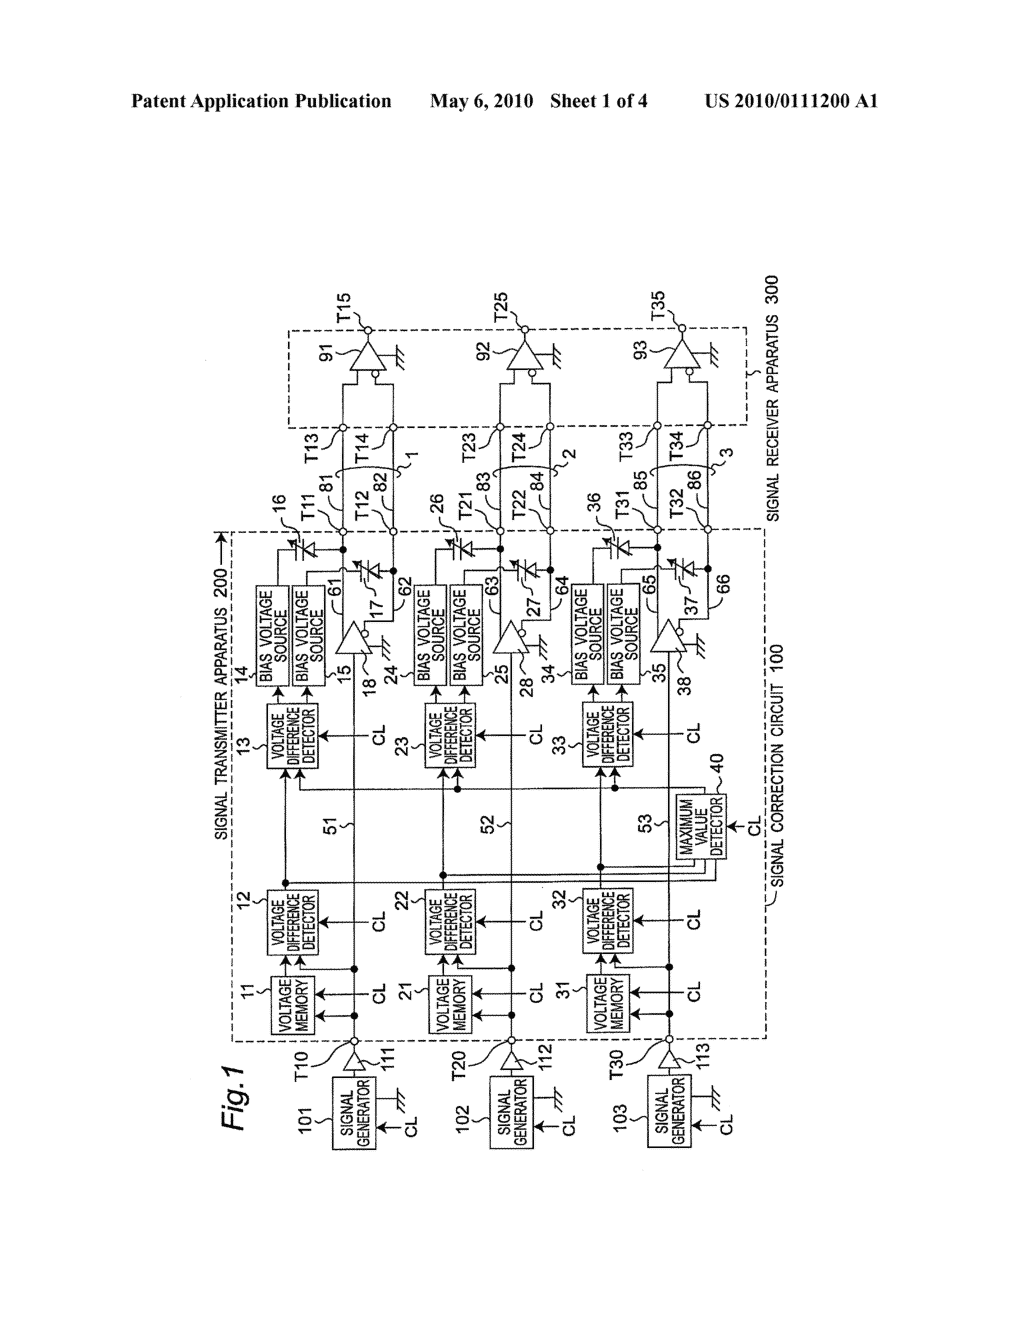 SIGNAL TRANSMITTING APPARATUS PROVIDED WITH SIGNAL CORRECTION CIRCUIT FOR SUPPRESSING RADIATION OF ELECTROMAGNETIC WAVES BETWEEN TRANSMISSIN LINES - diagram, schematic, and image 02